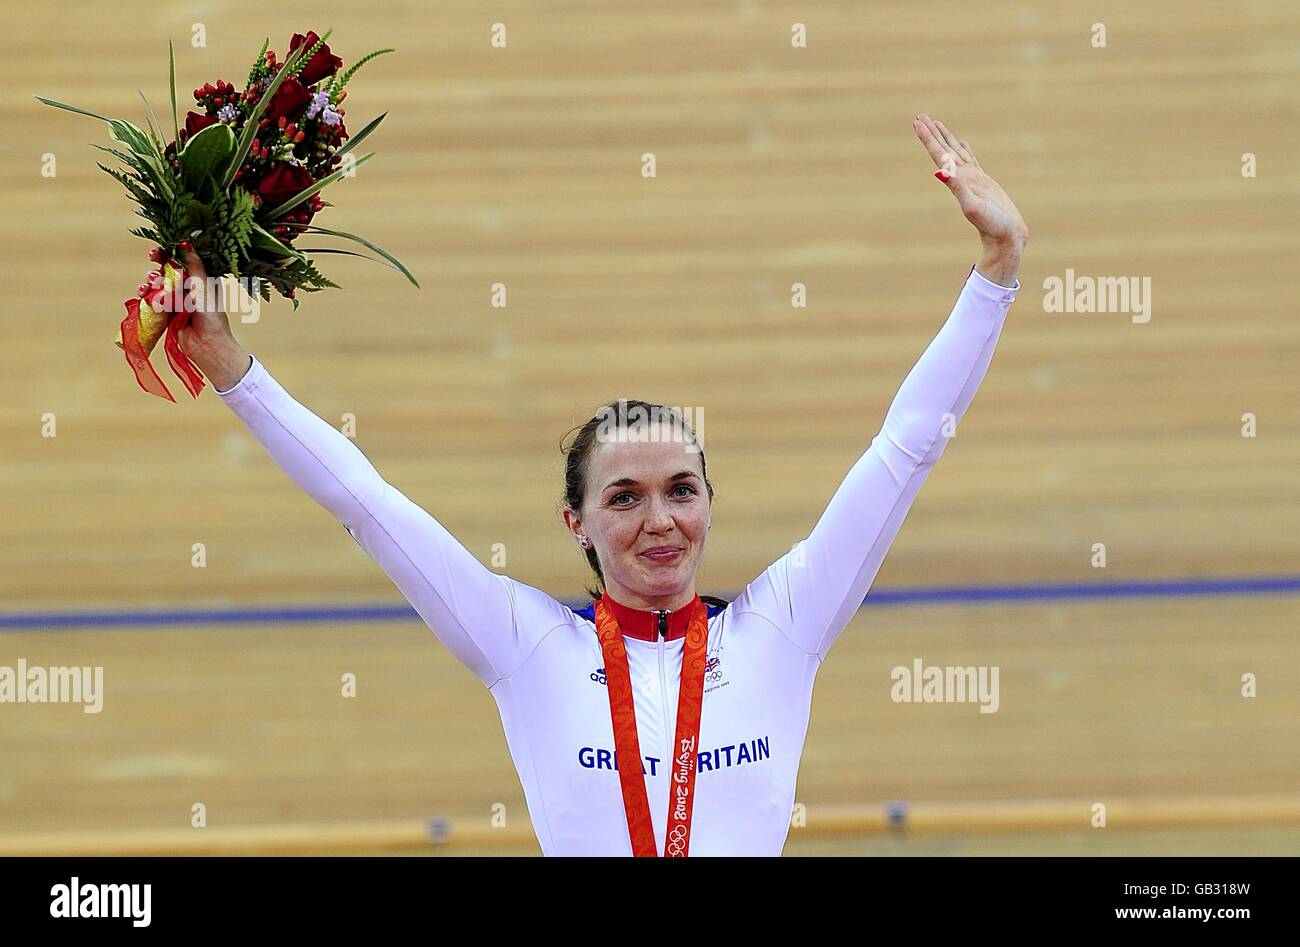 Great Britain's Victoria Pendleton celebrates after winning the gold Medal in the Women's Sprint Finall at the Laoshan Velodrome at the 2008 Beijing Olympic Games in China. Stock Photo